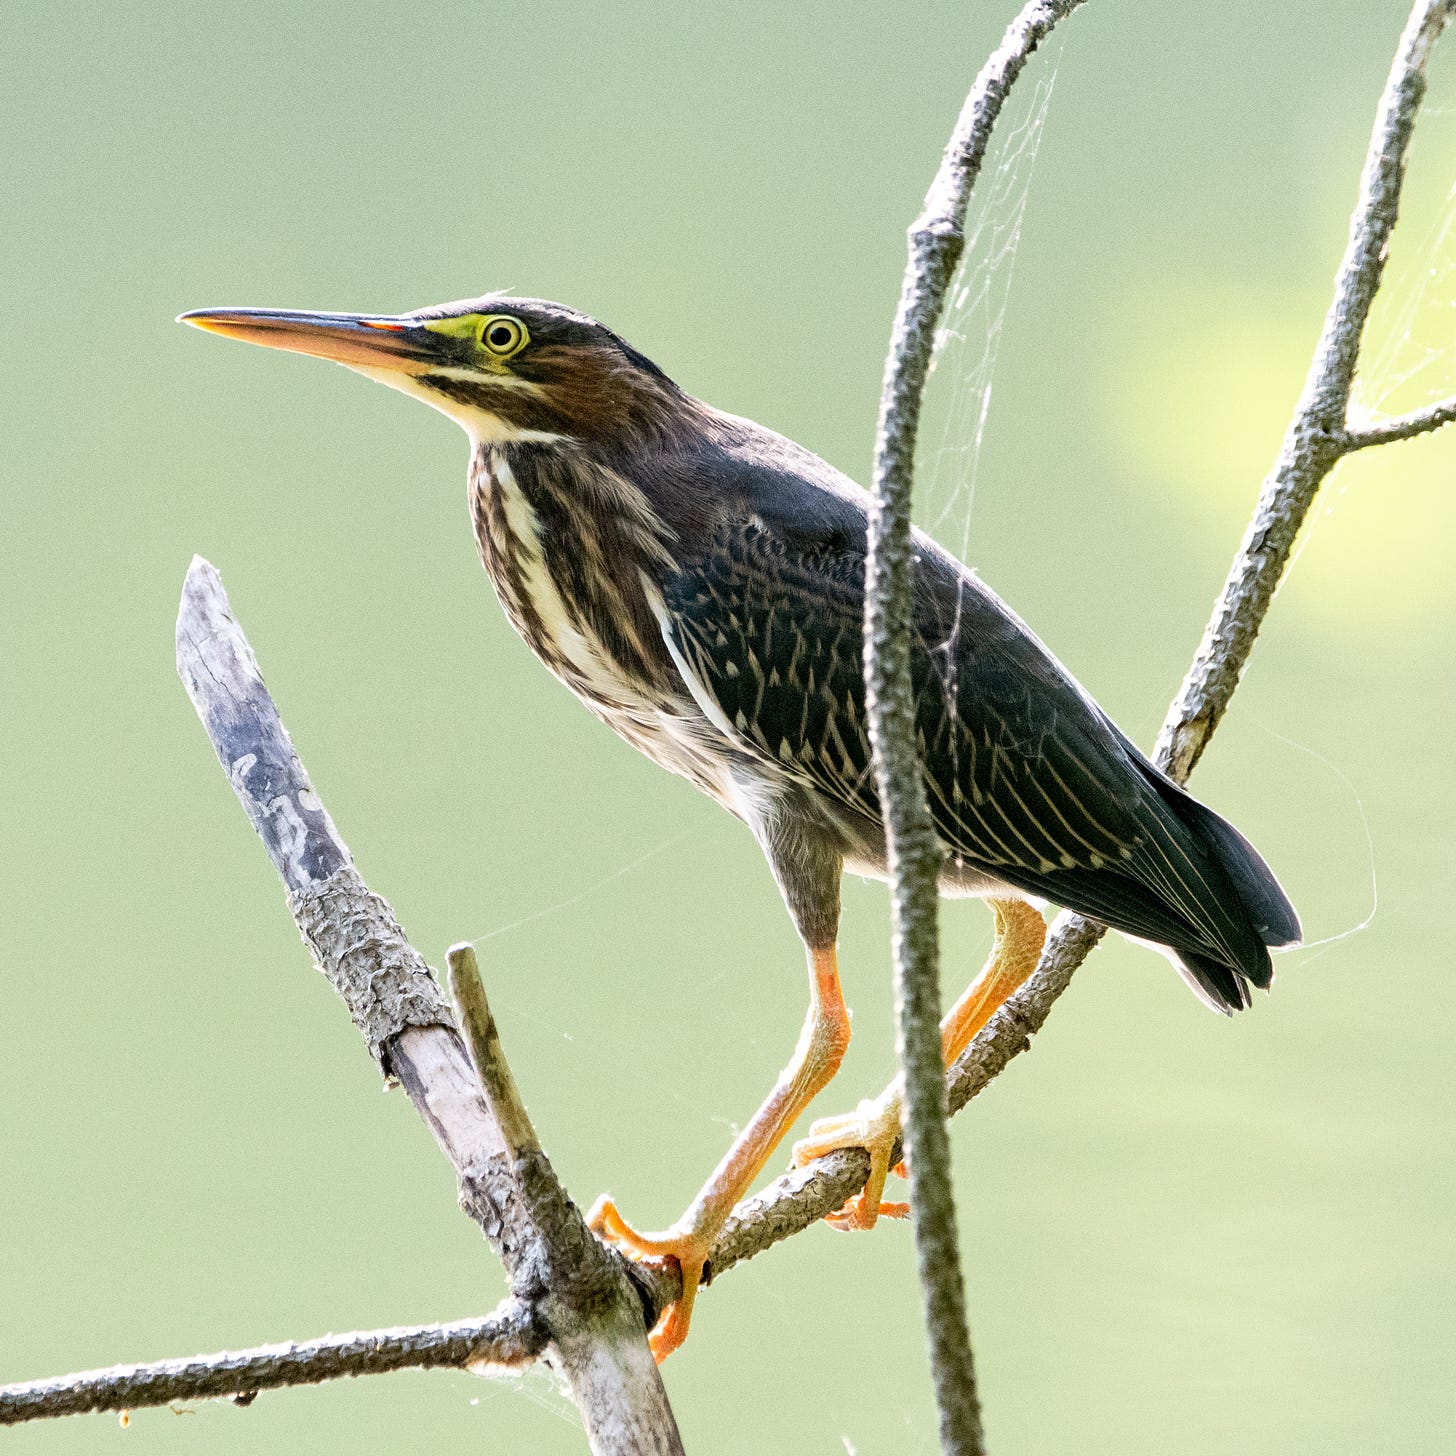 A green heron perched on a curving branch like an arrow in a drawn bow